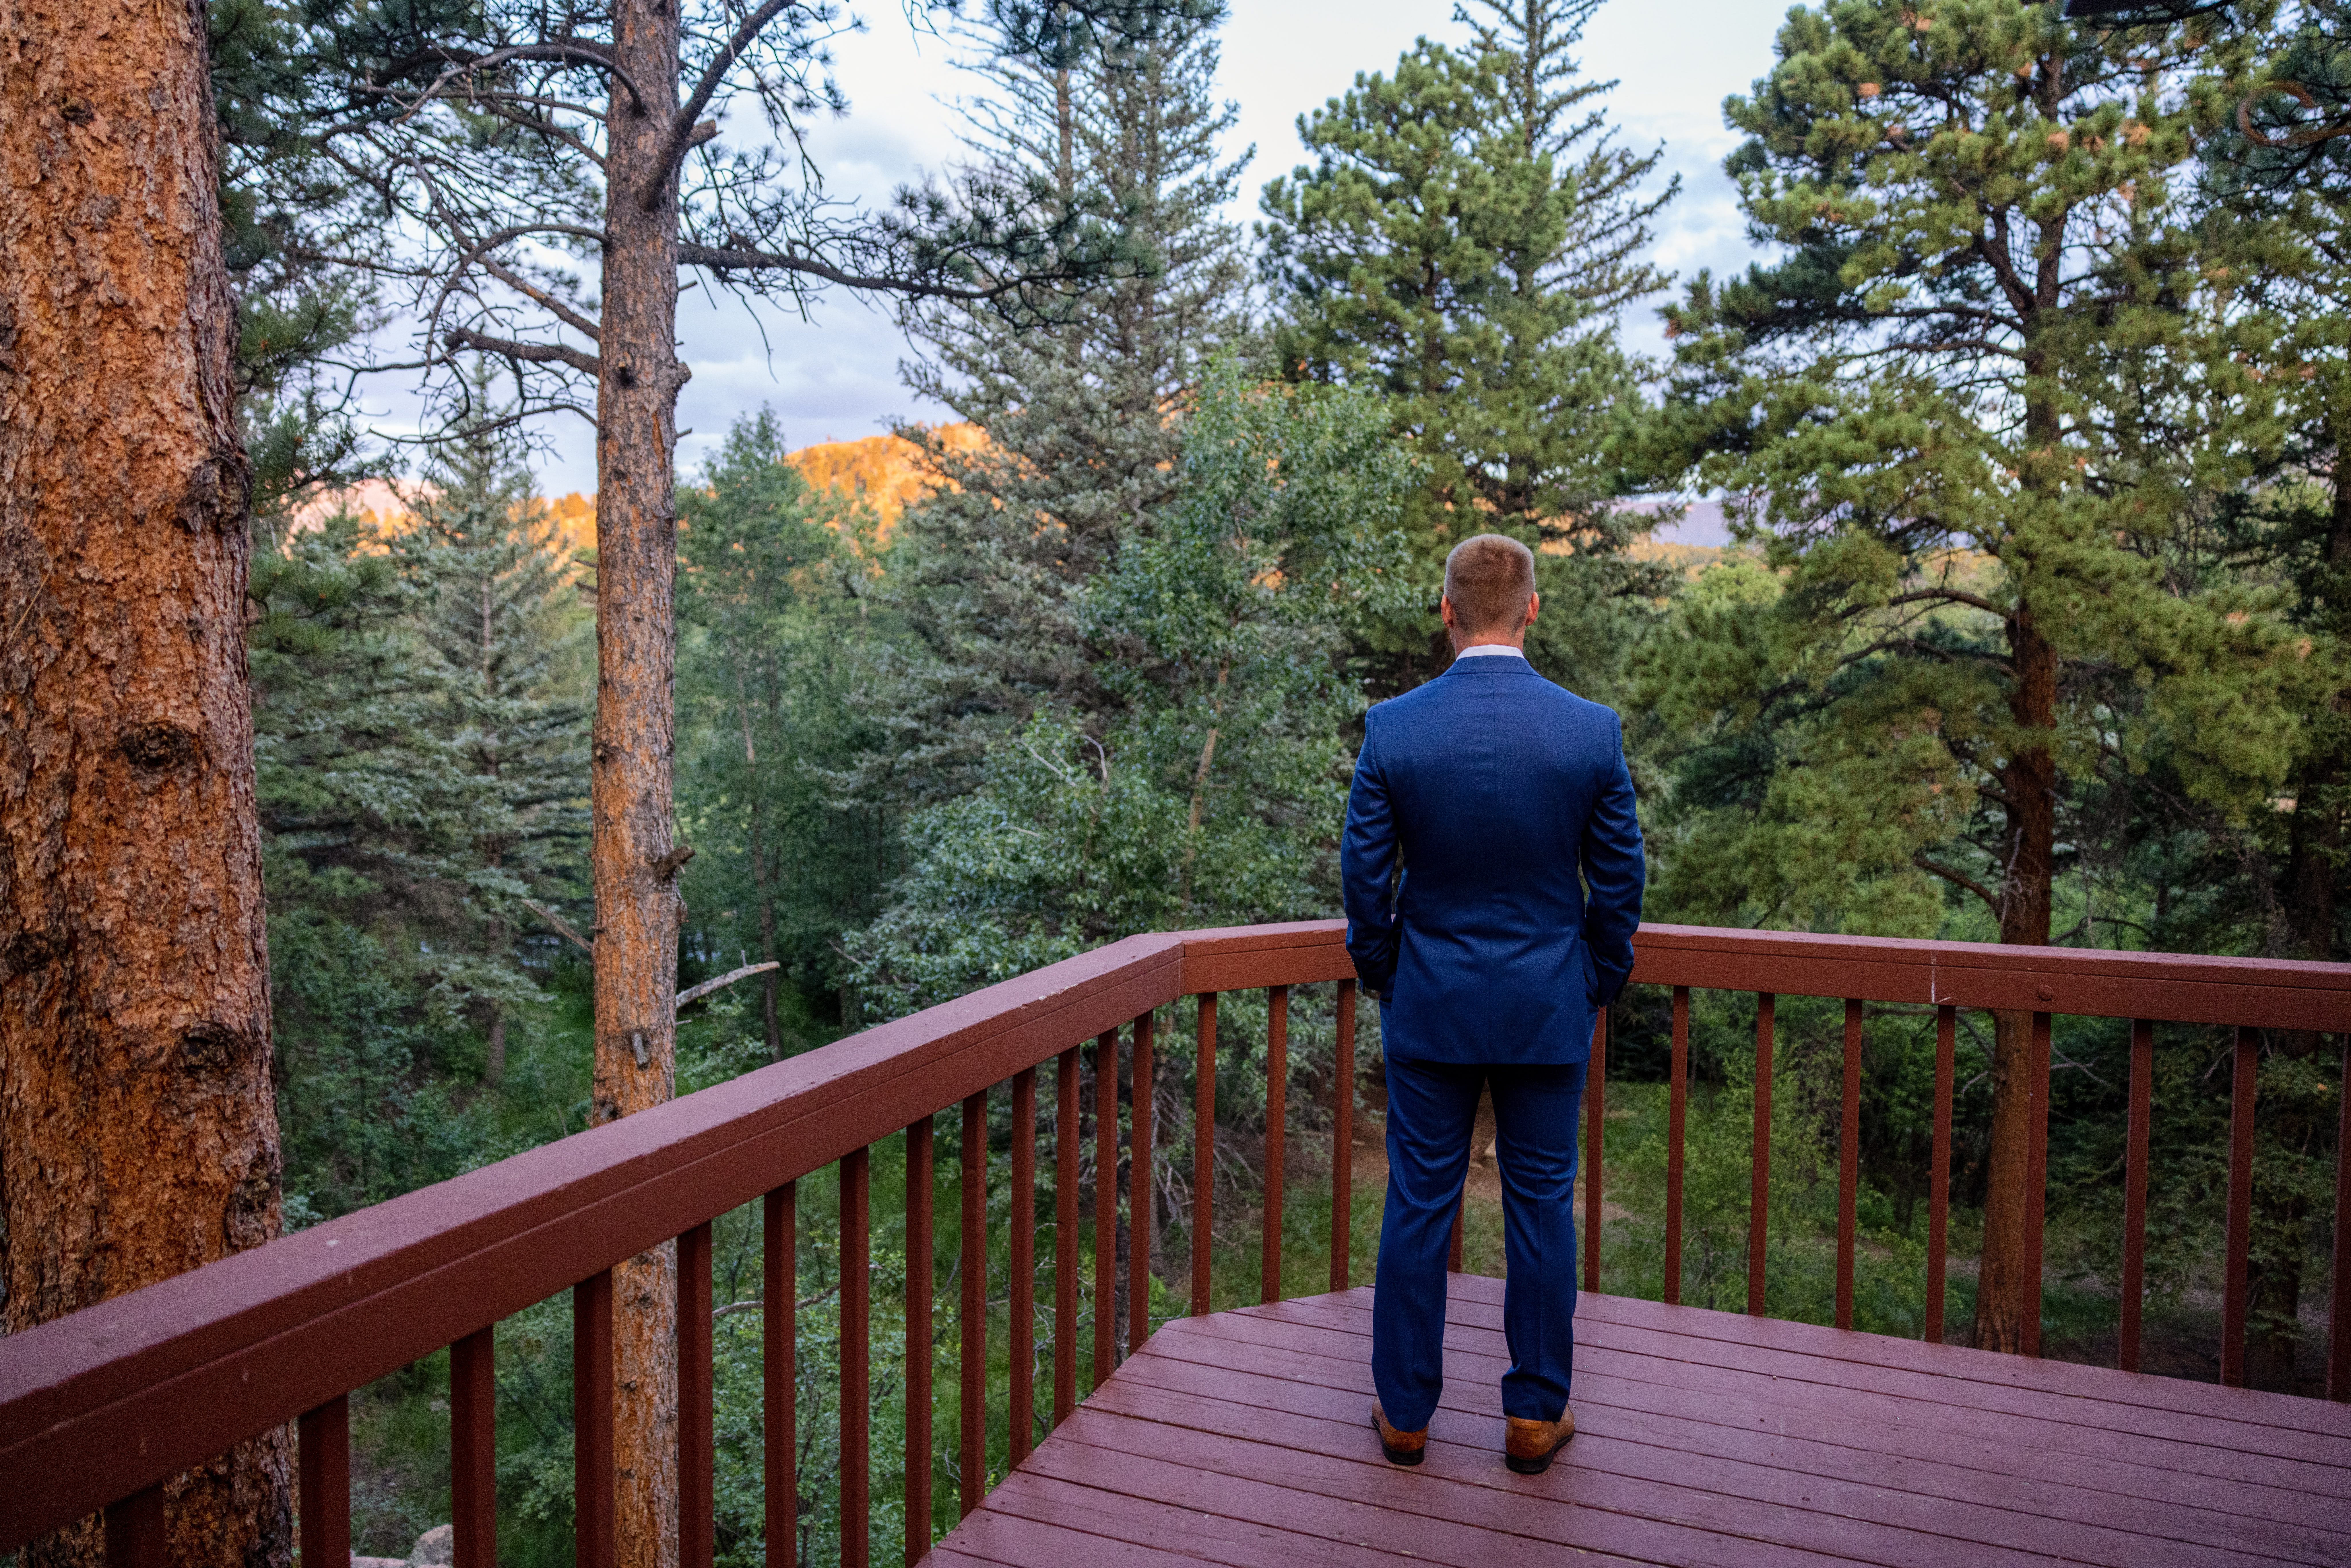 The groom waits for his bride for their first look at Romantic RiverSong Inn in Estes Park on their wedding day